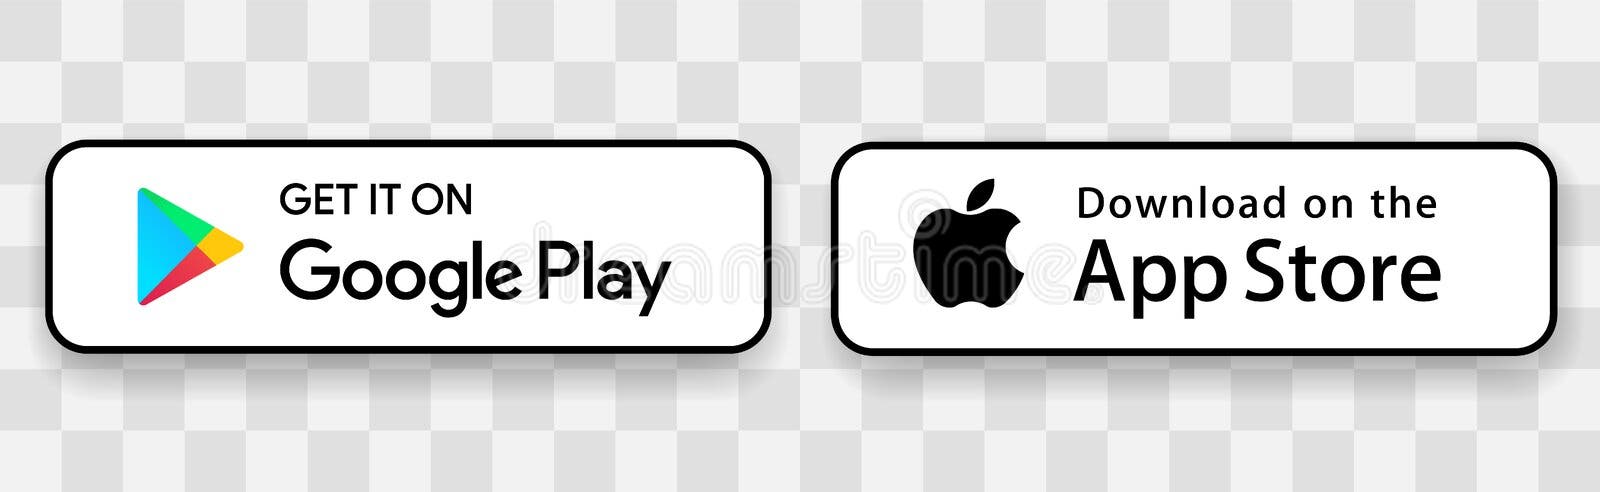 Google Play Games Icon Stock Illustrations – 32 Google Play Games Icon  Stock Illustrations, Vectors & Clipart - Dreamstime